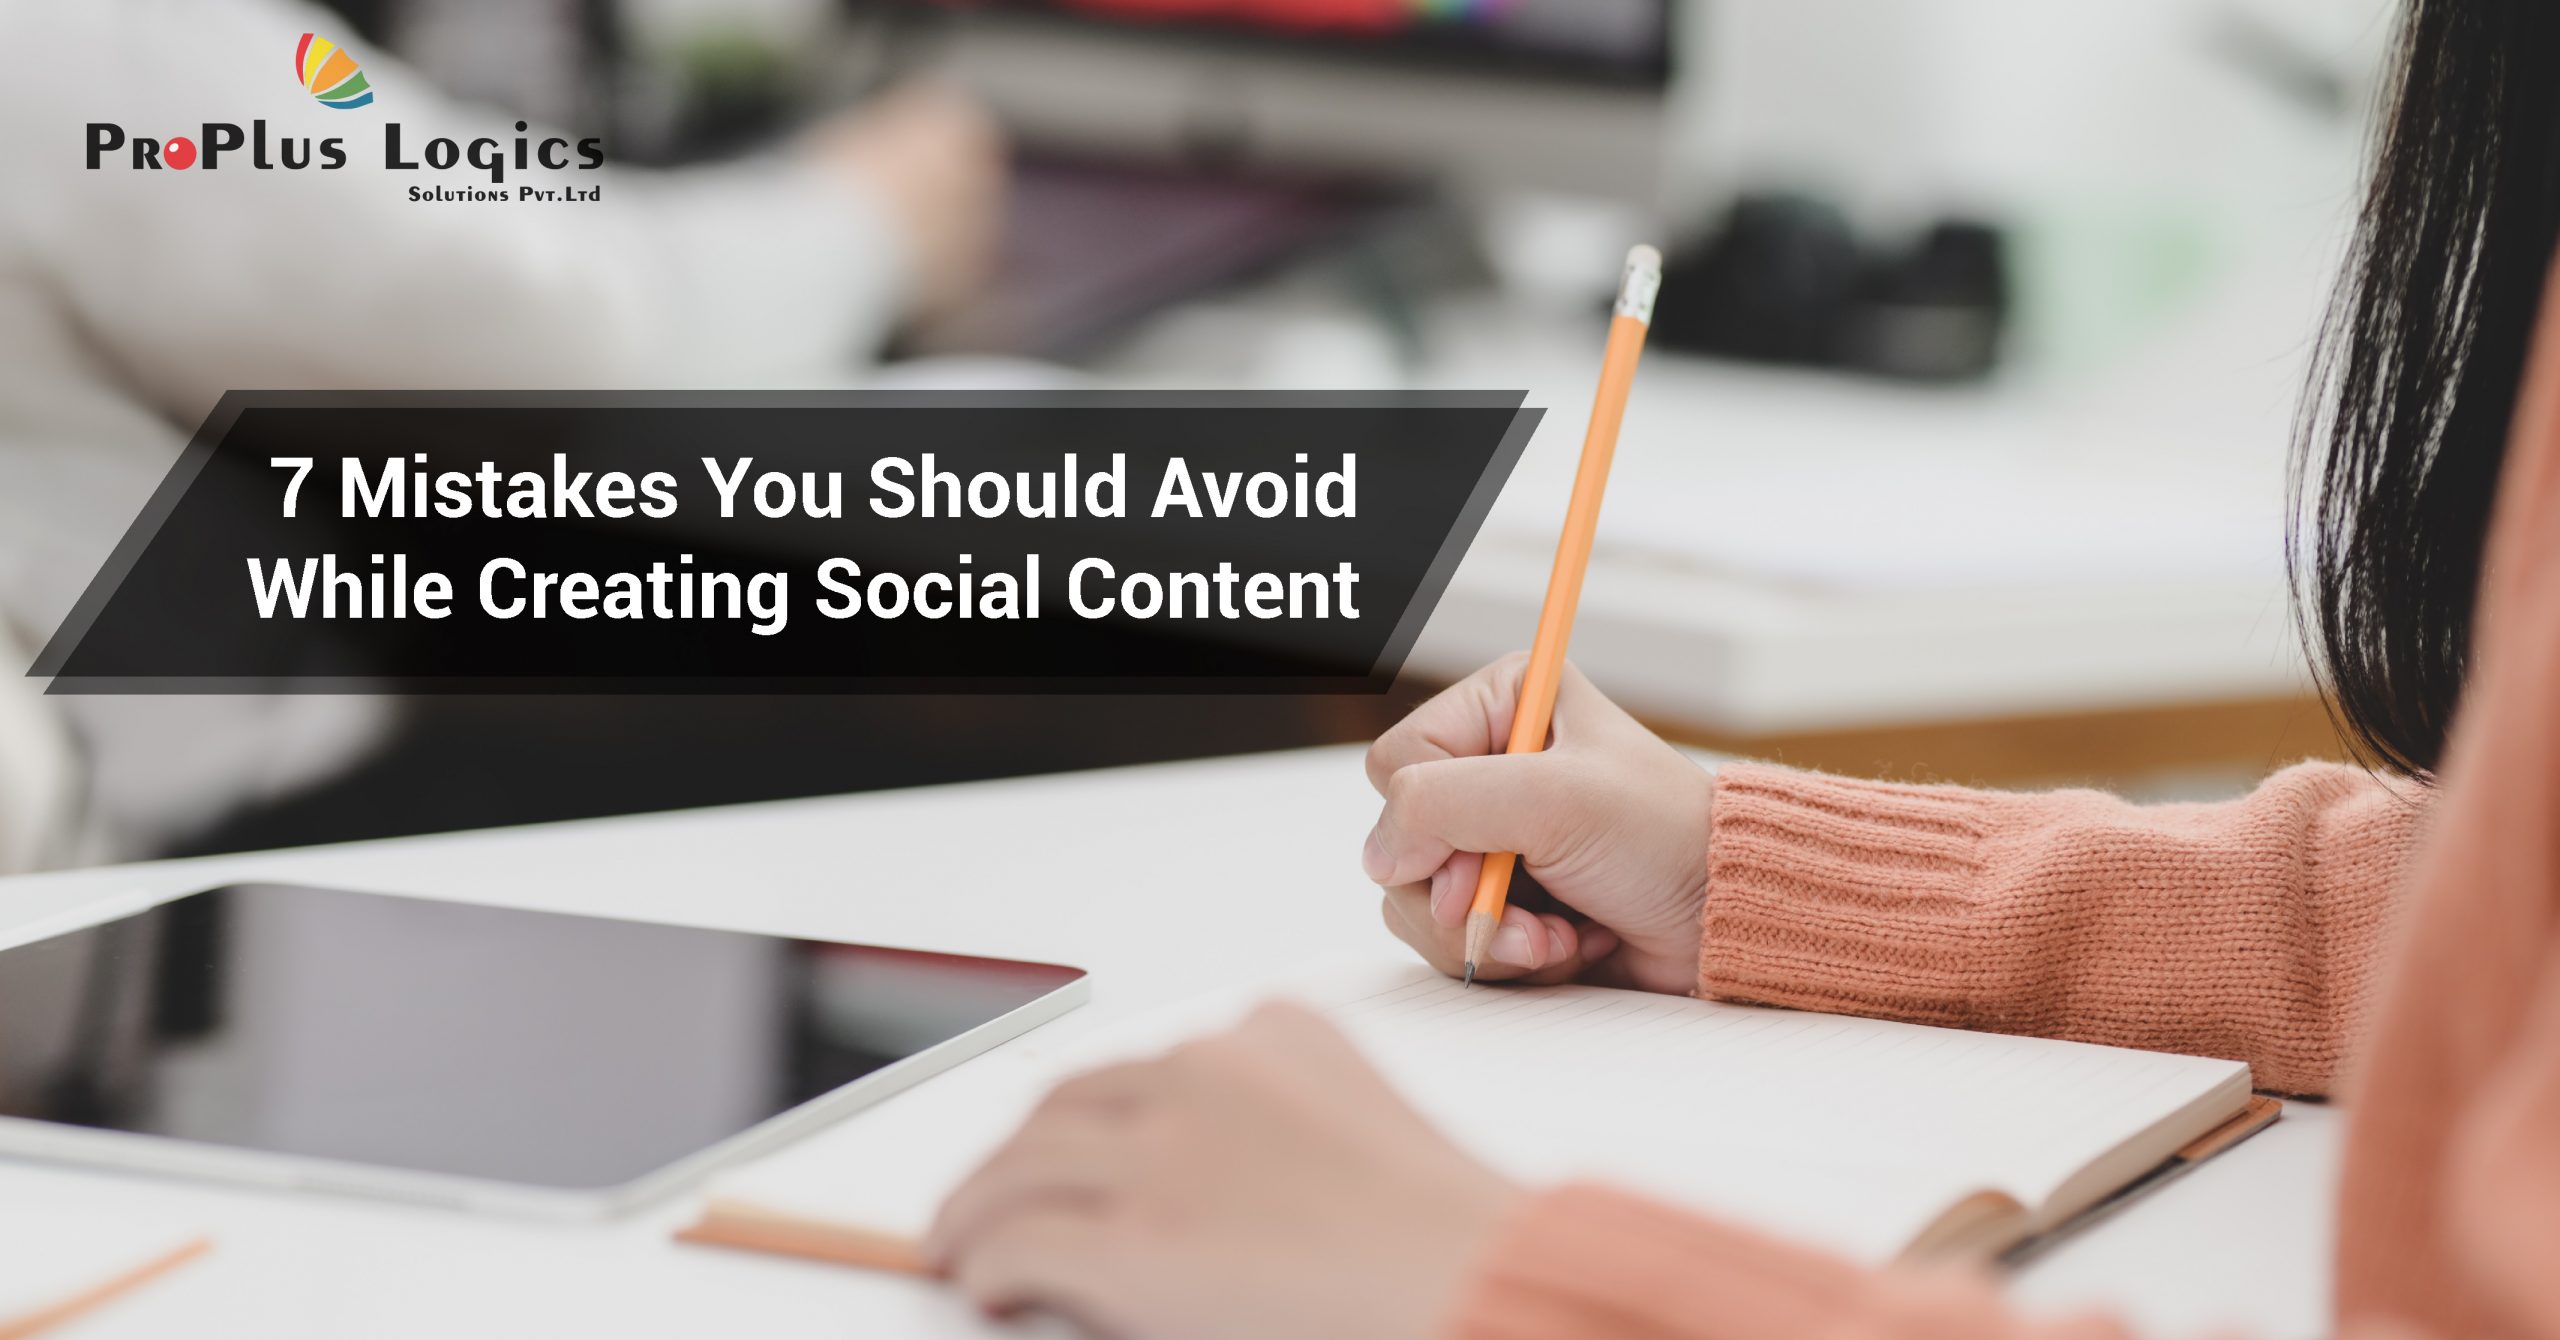 7 Mistakes You Should Avoid While Creating Social Content